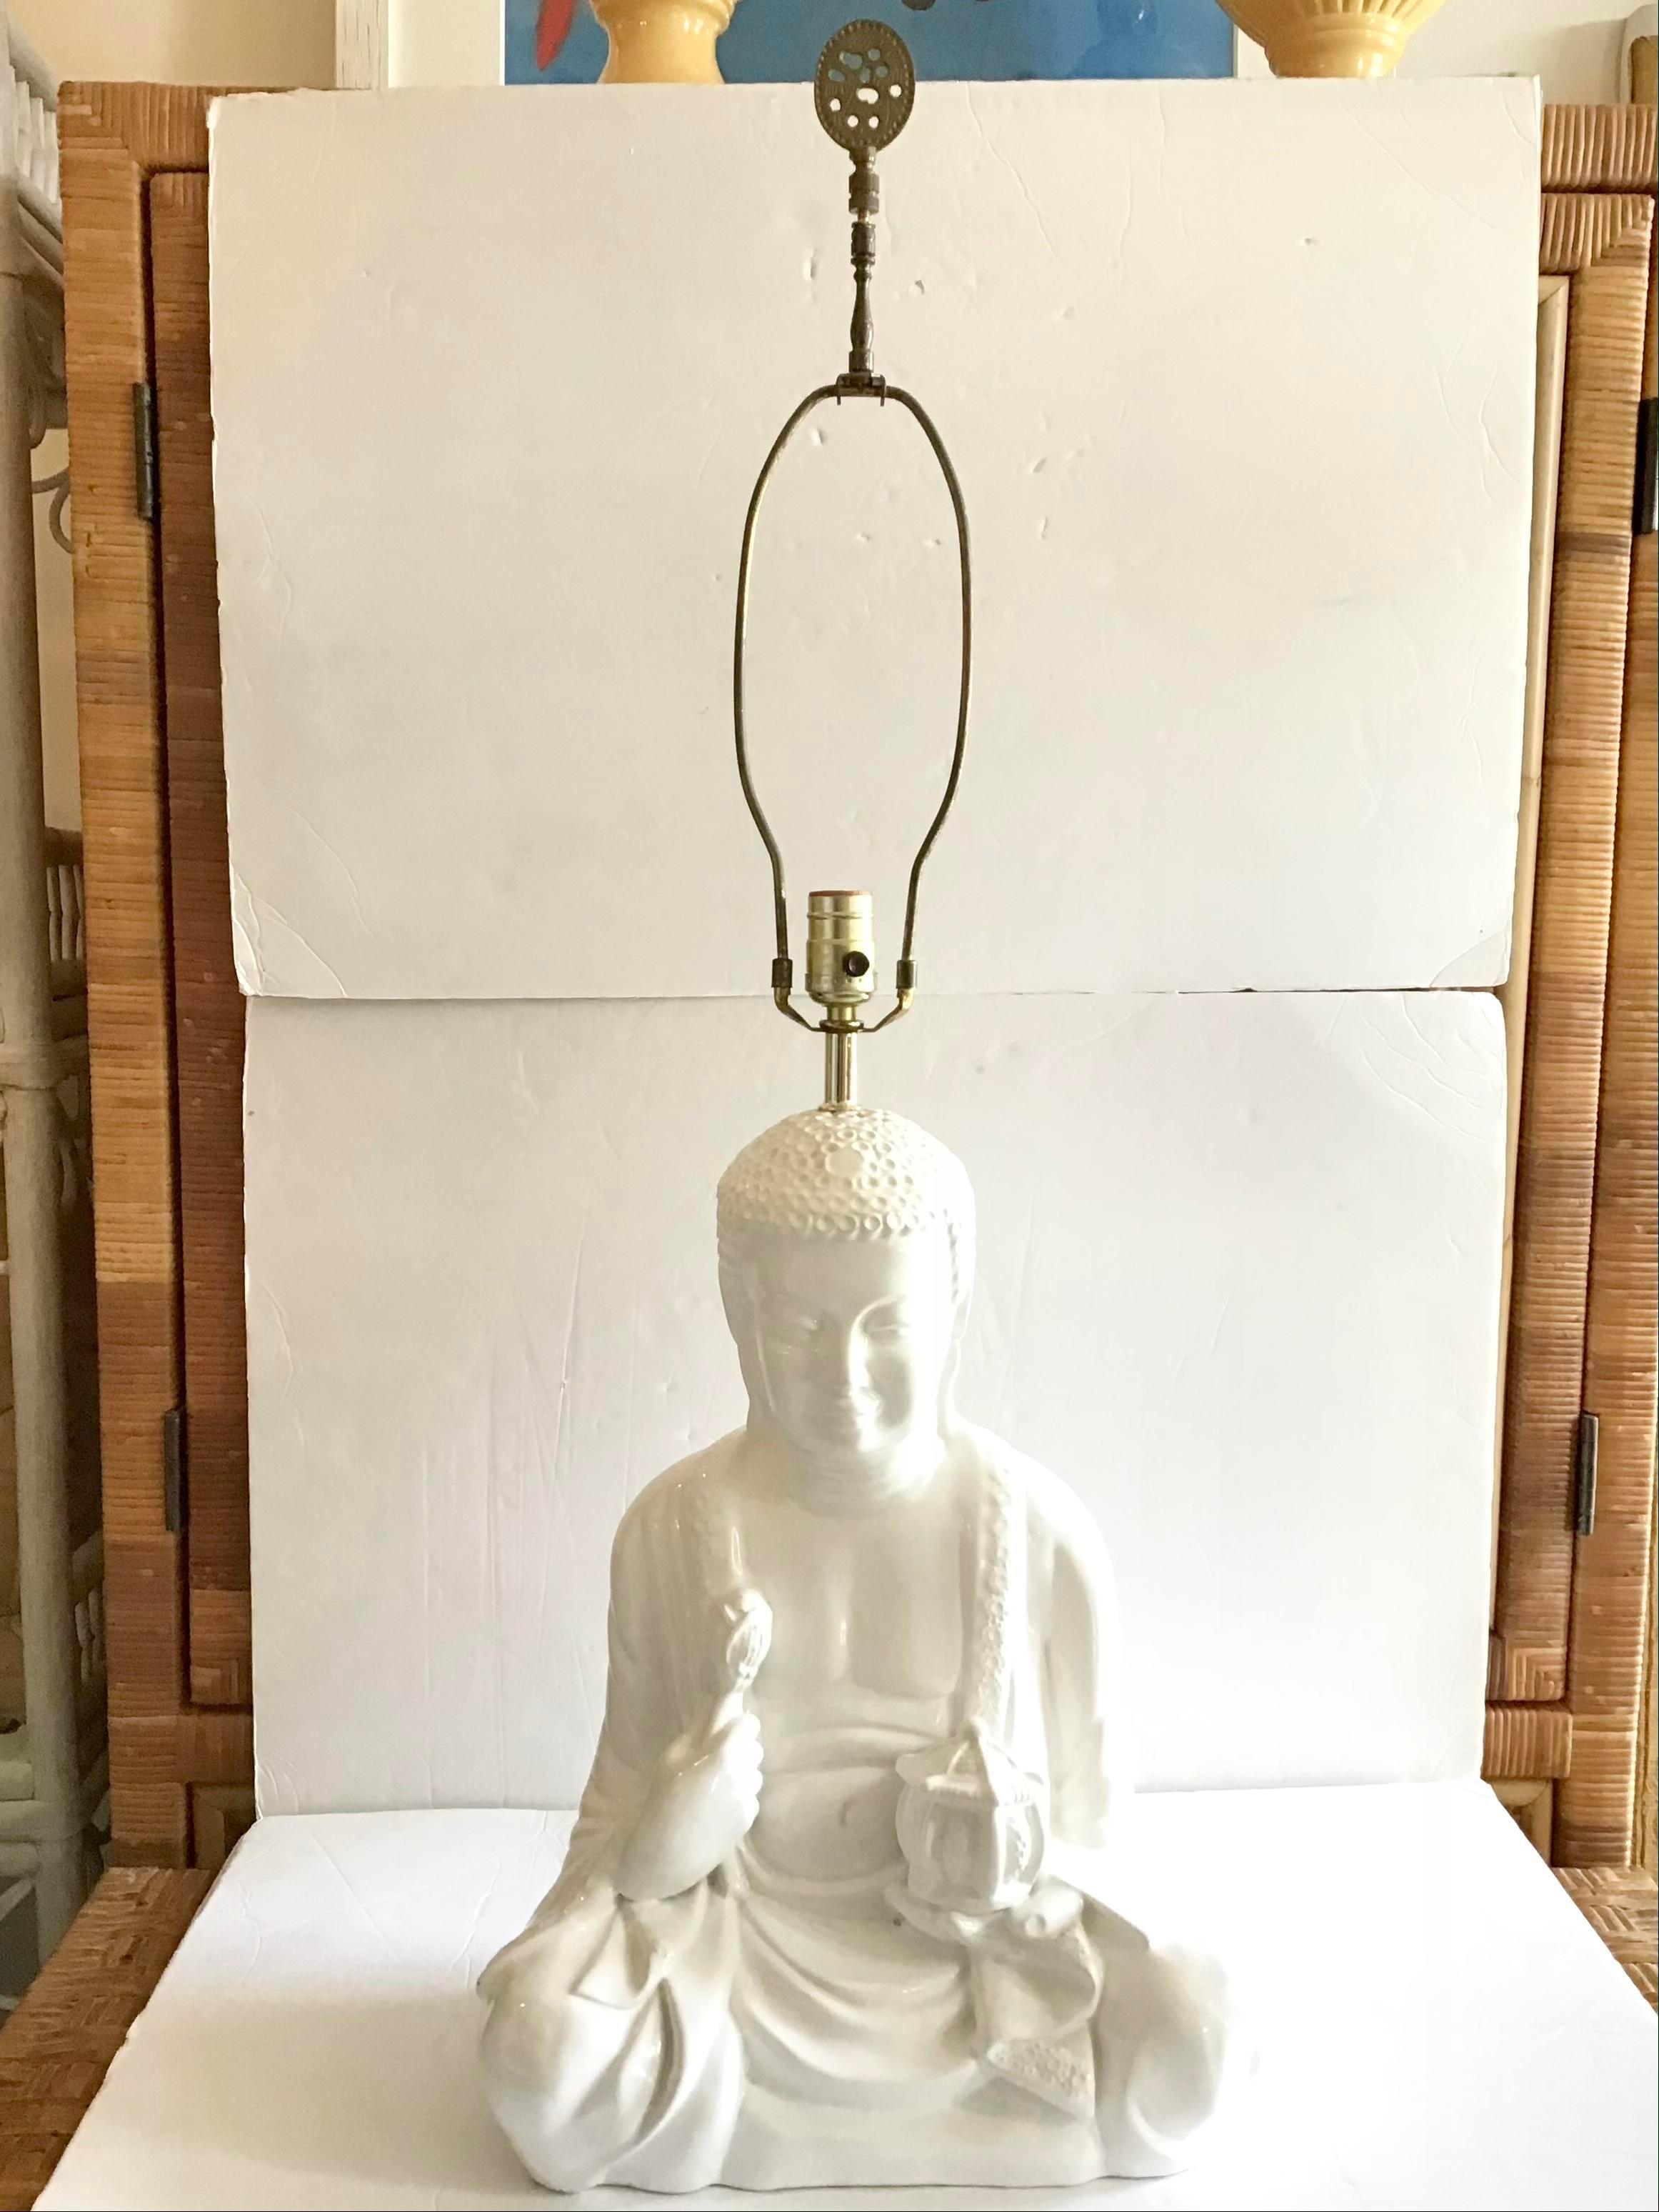 Large and beautiful Buddha in meditation pose. Very unique as it is made of ceramic, meticulously molded with figures and includes a detailed finial. Perfect addition to your meditation room.